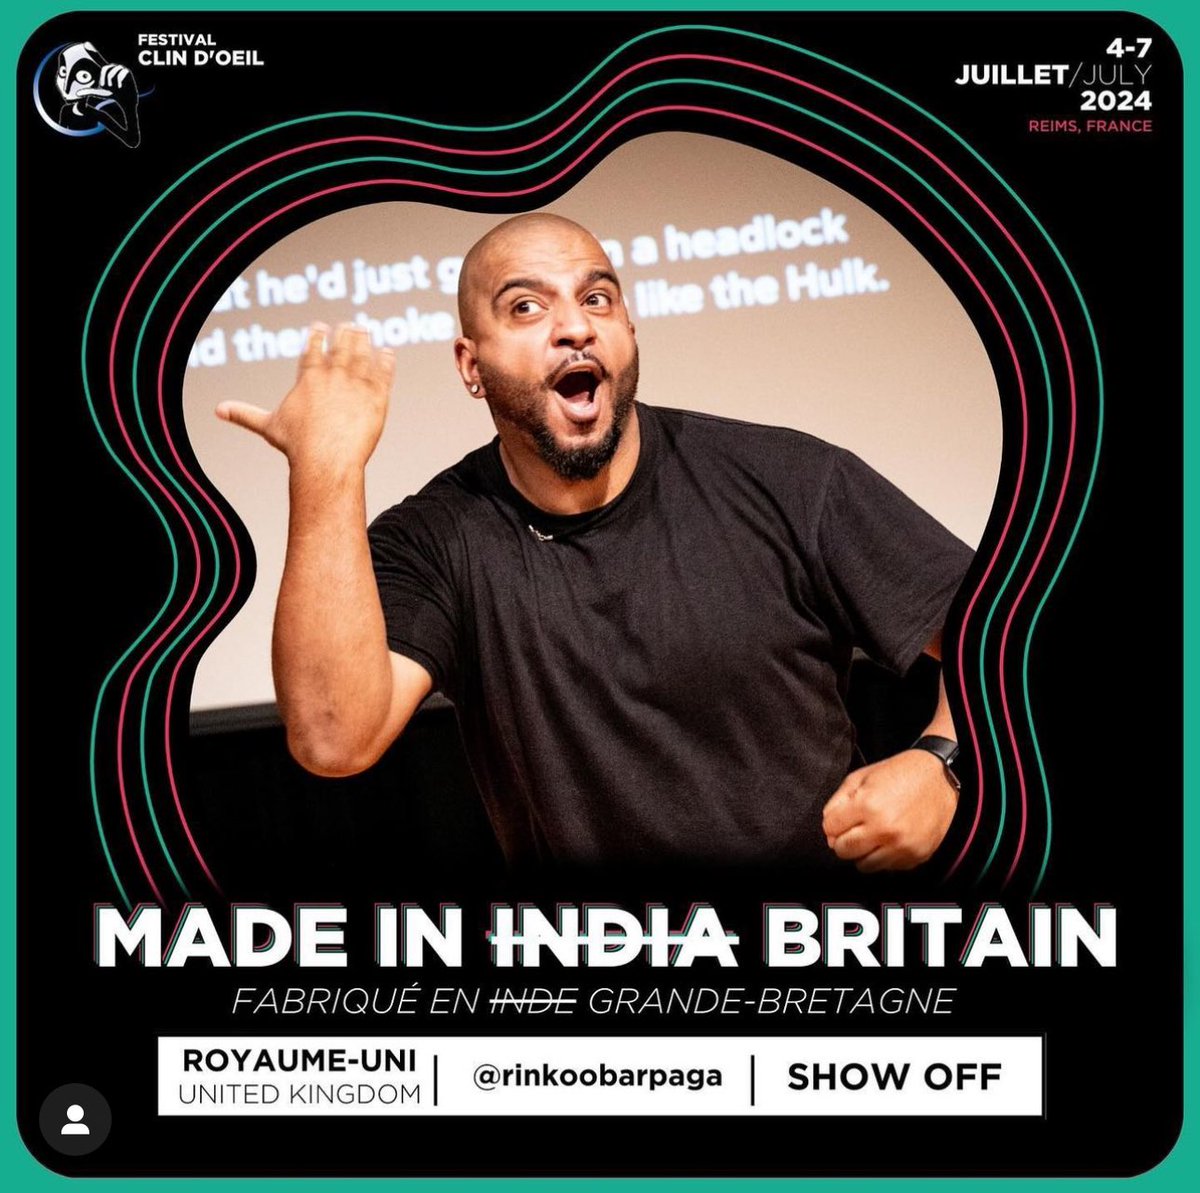 Great news! My one-man show (Made in India/Britain) is finally making its way to France! I’m beyond excited and can’t wait to share this amazing experience with an entirely international audience.